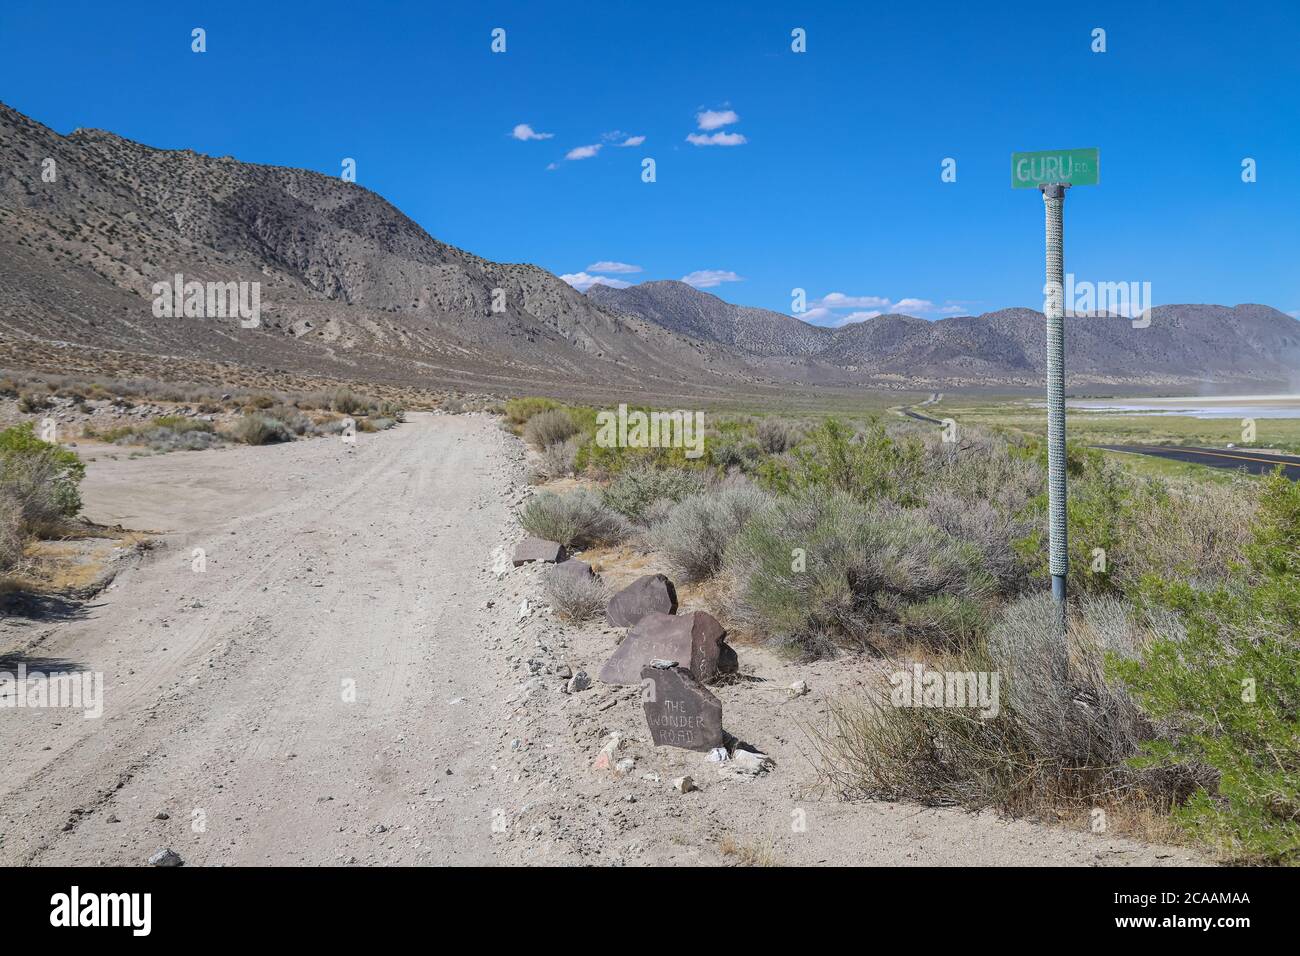 GERLACH, NEVADA, UNITED STATES - Jul 04, 2020: Guru Road, a dirt road adjacent to the playa in northern Nevada's Black Rock Desert, has been lined wit Stock Photo